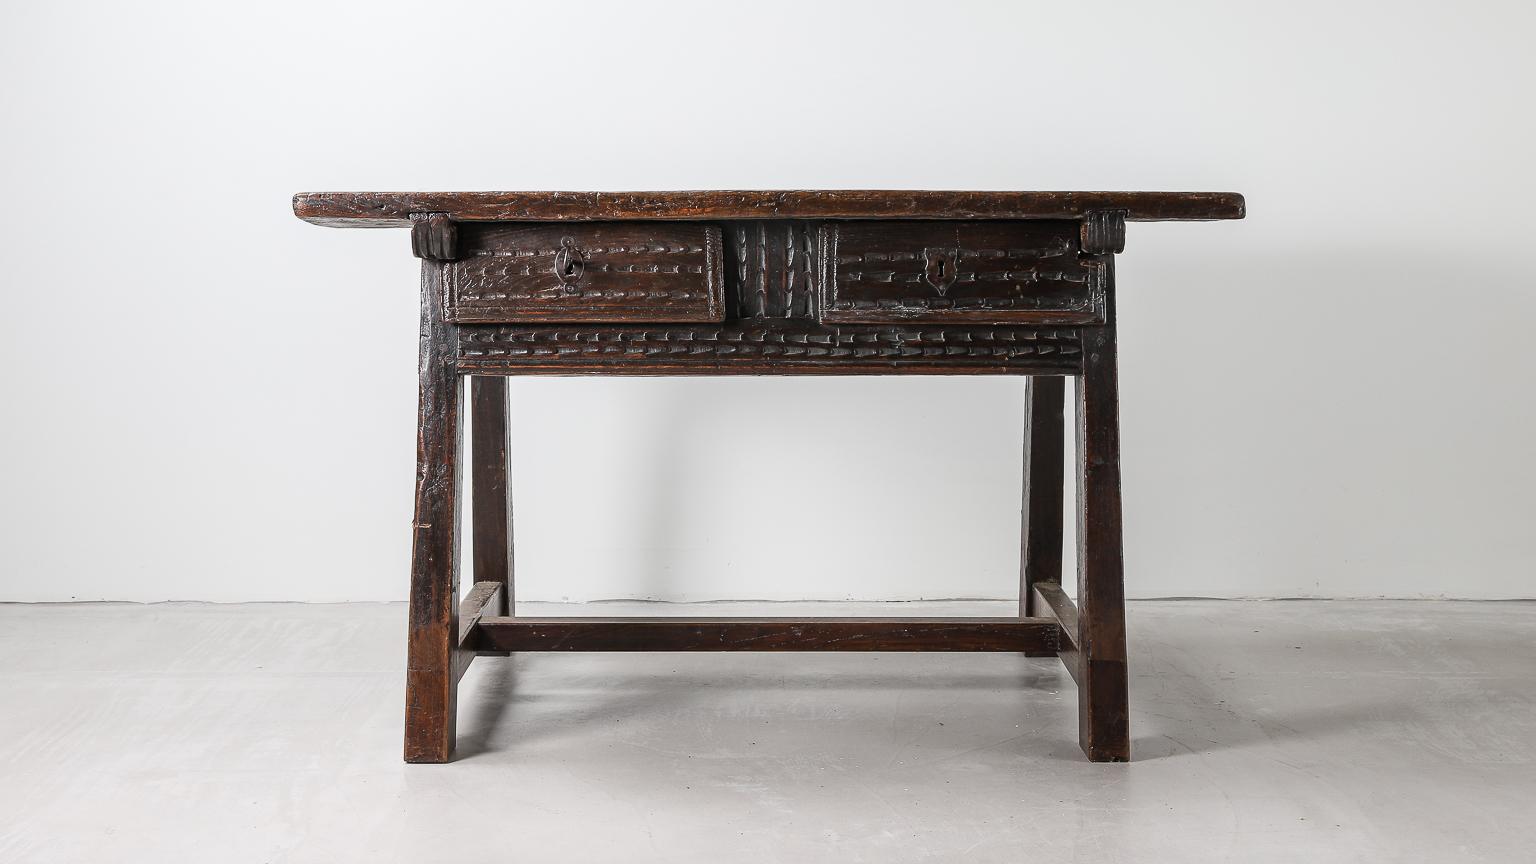 Original 17th century Spanish Baroque inlaid walnut desk or centre table, with a rectangular single plank top above a frieze fitted with two chip carved drawers, with similarly carved panels below and to the rear, standing on angles legs with a